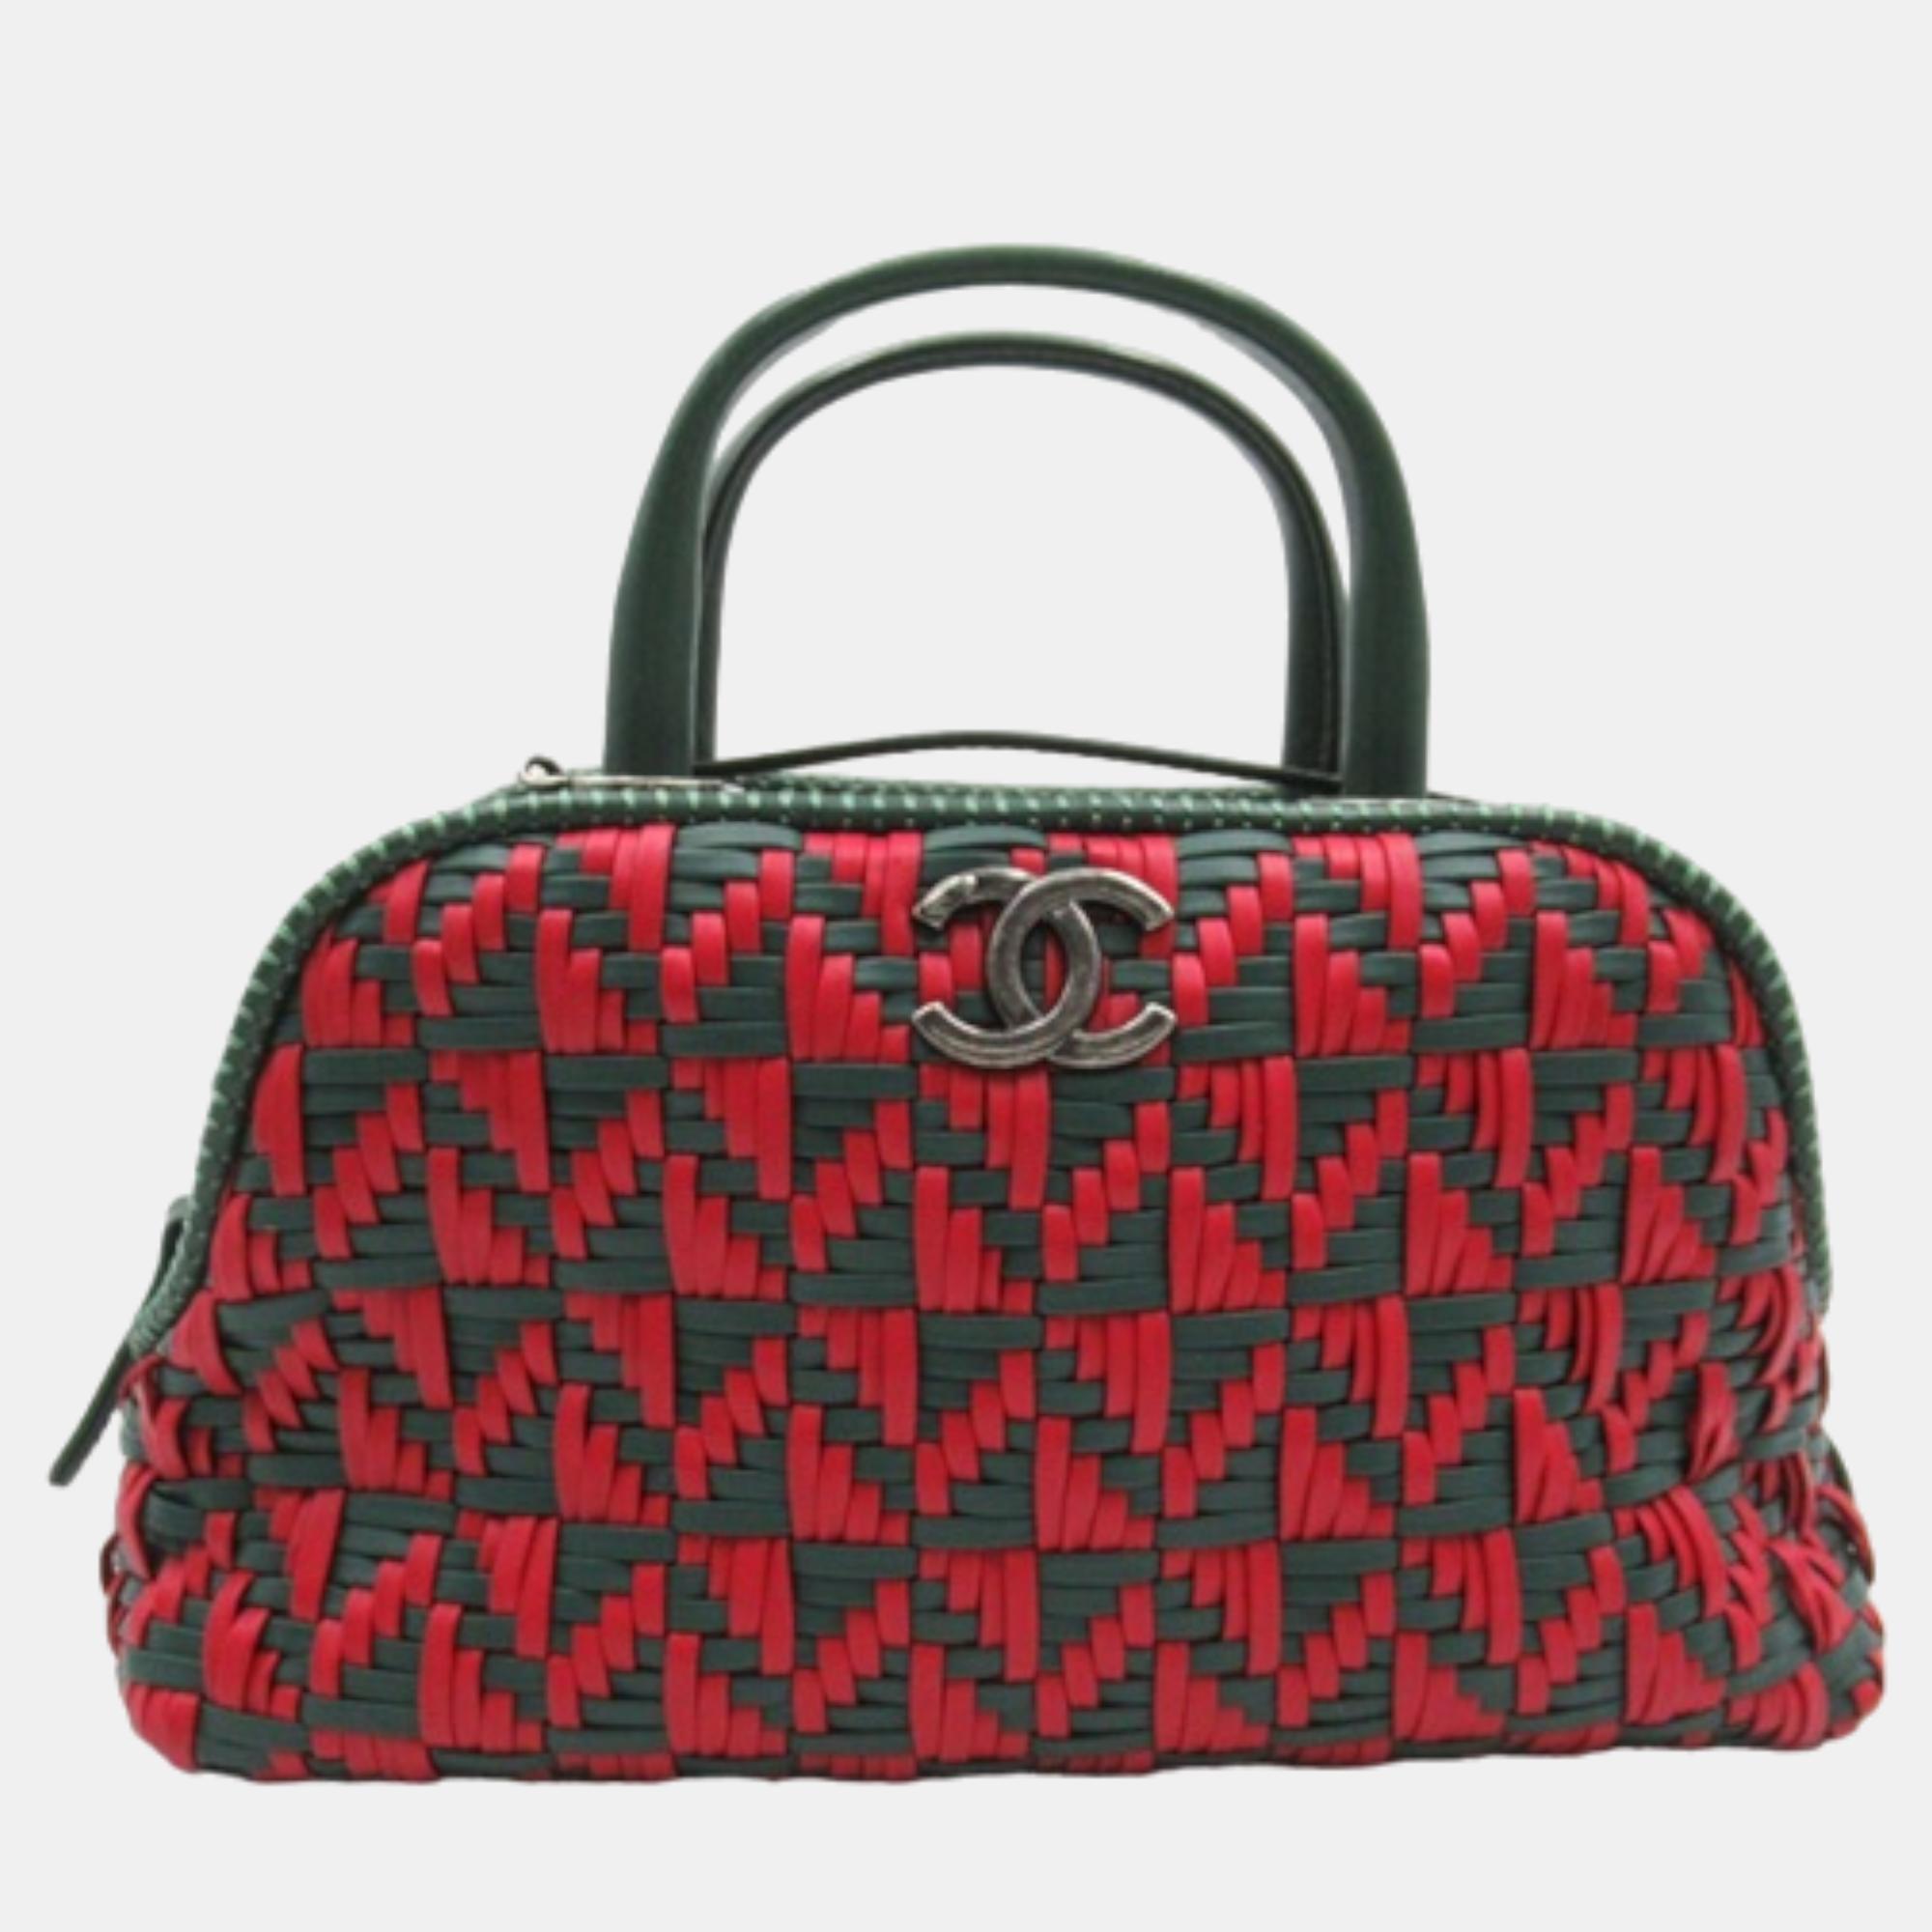 Chanel Red Leather Woven Leather Mini Boston Bag